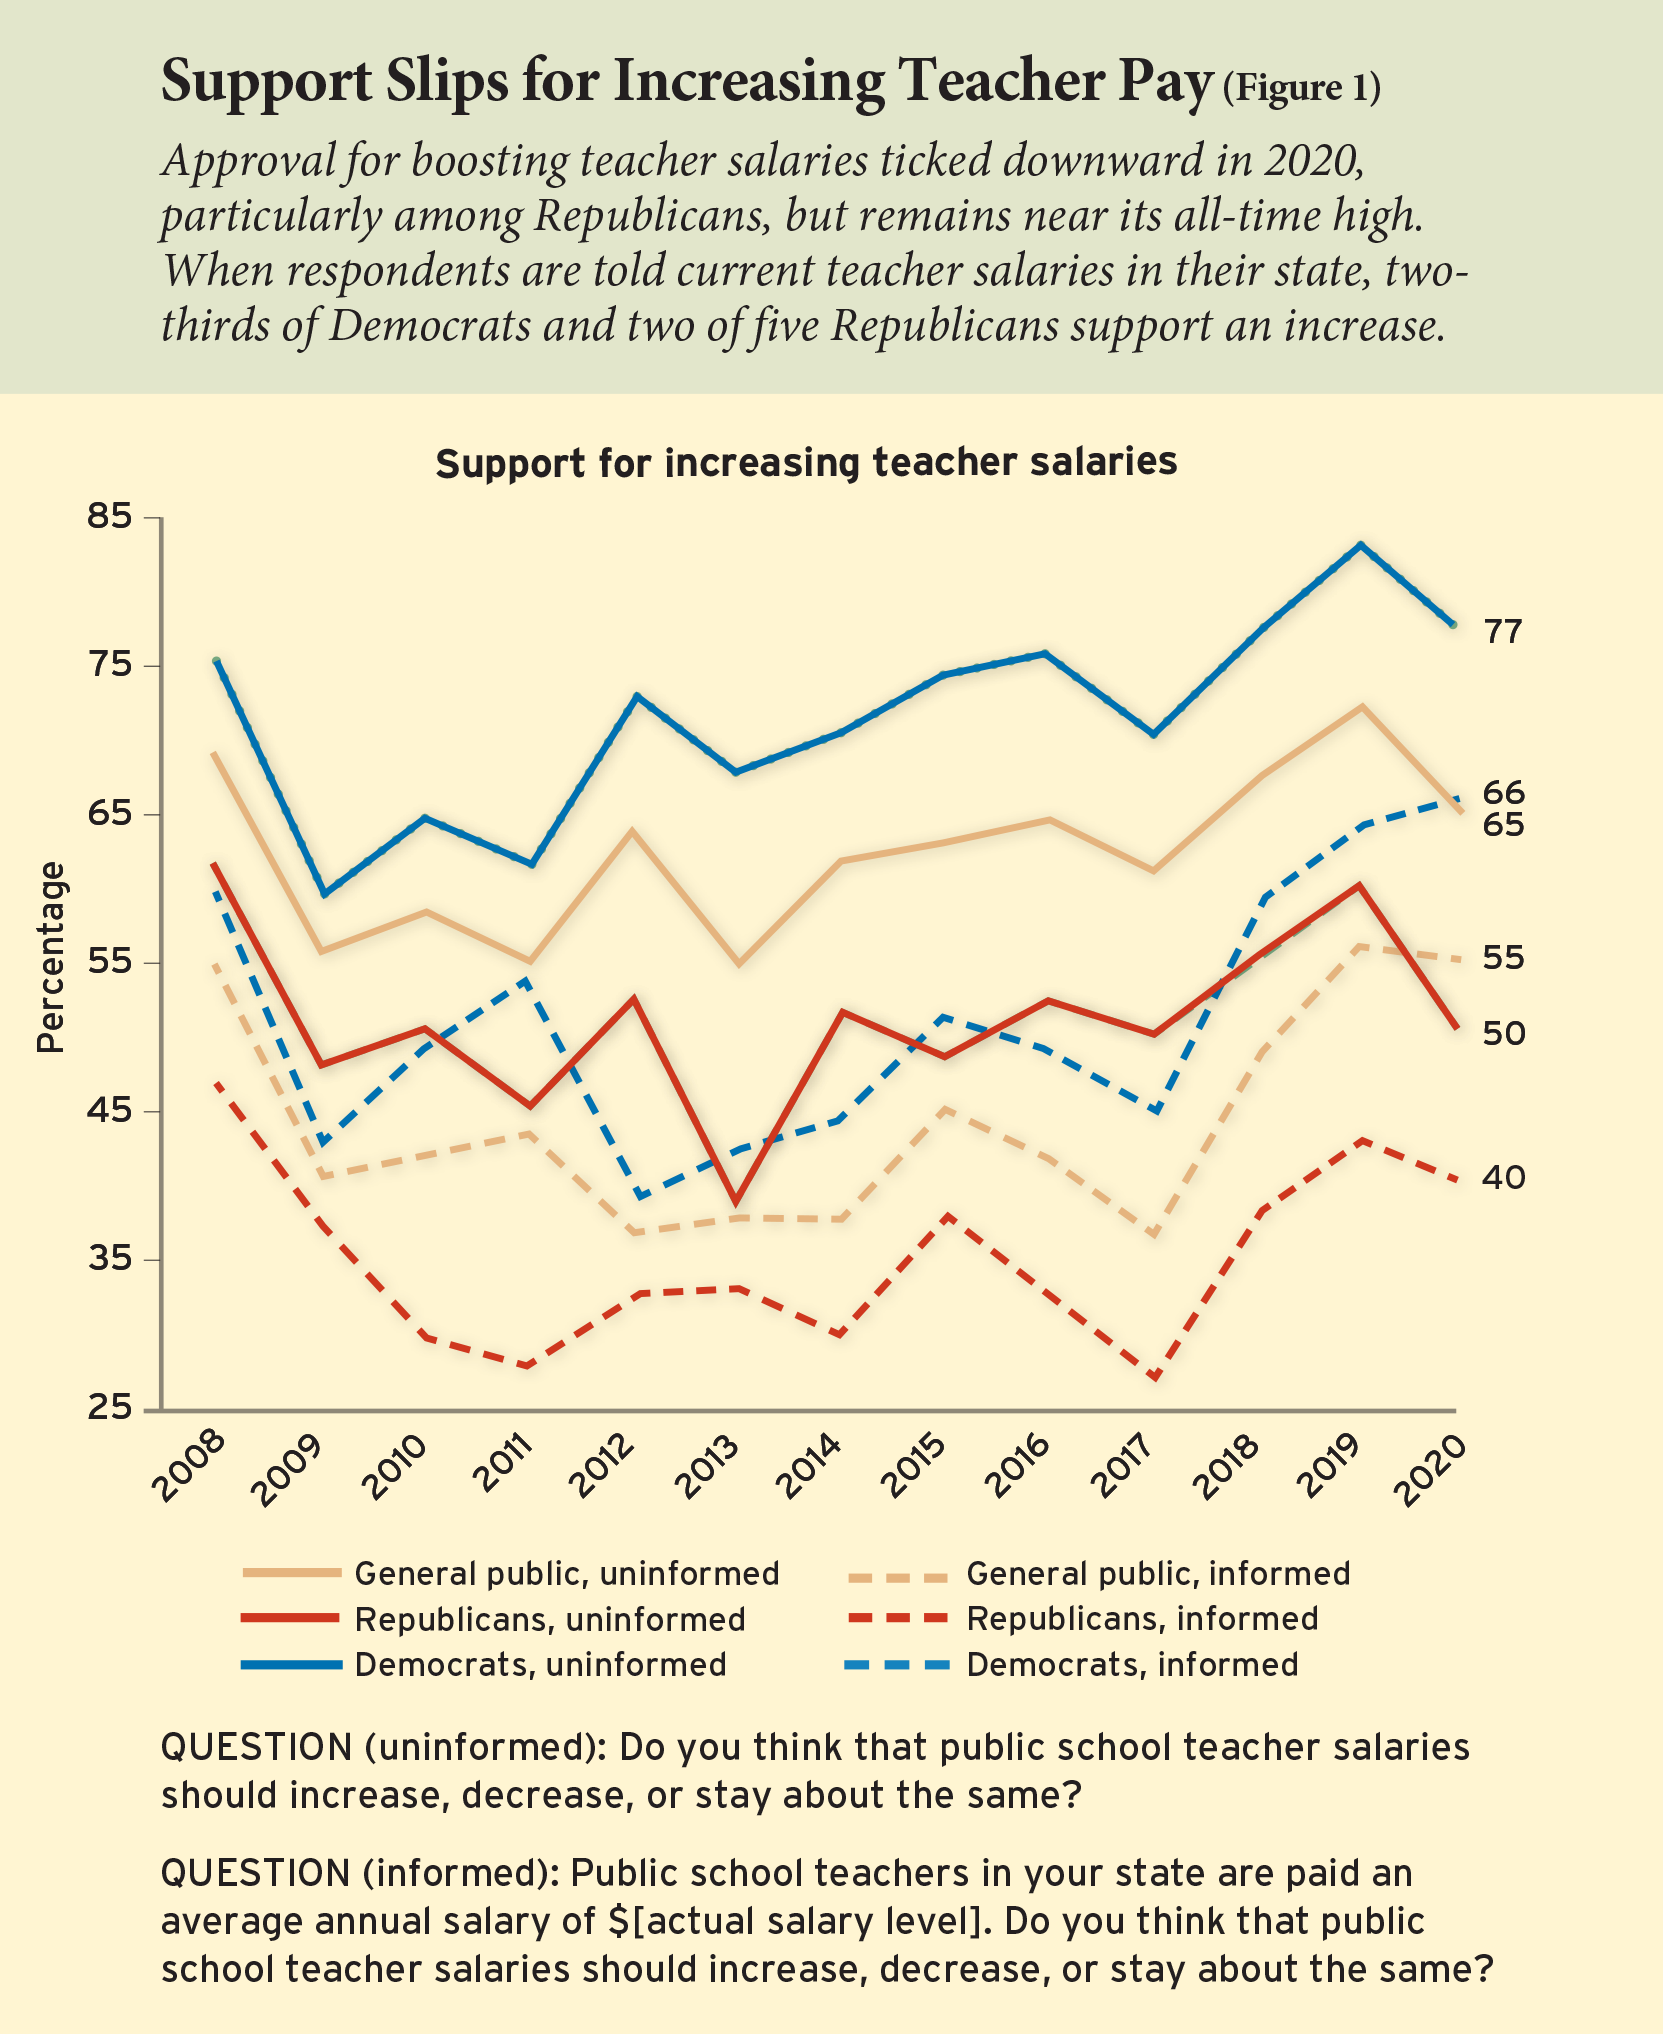 Figure 1: Support Slips for Increasing Teacher Pay